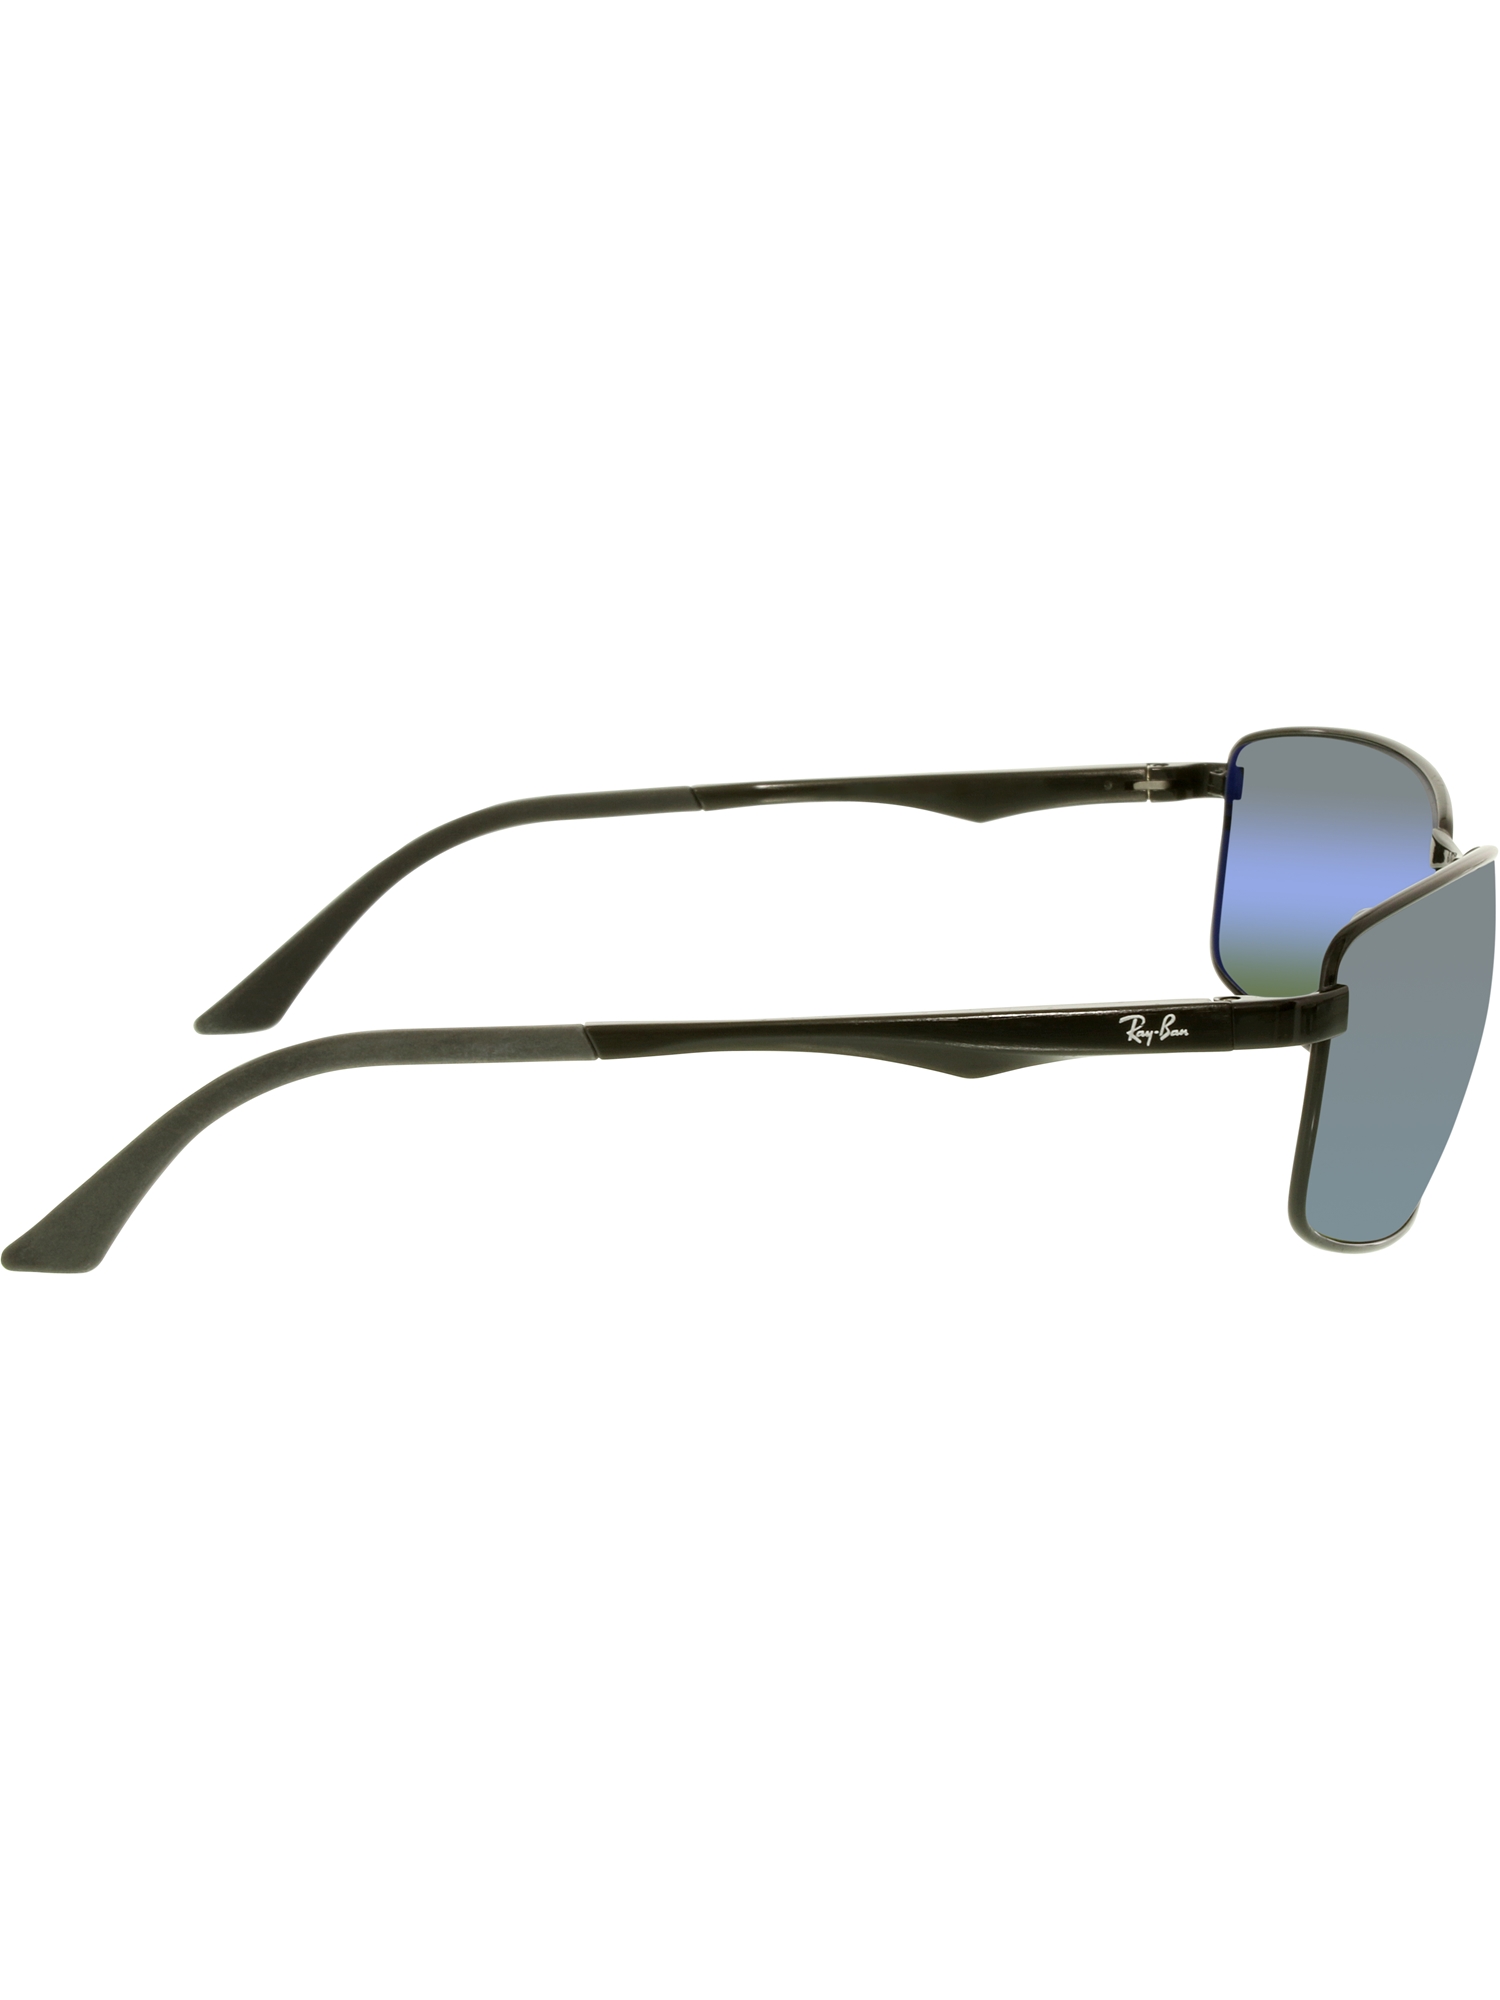 Ray Ban RB 3498 002/9A - Black/Green Polarized by Ray Ban for Men - 64-17-135 mm Sunglasses - image 2 of 3